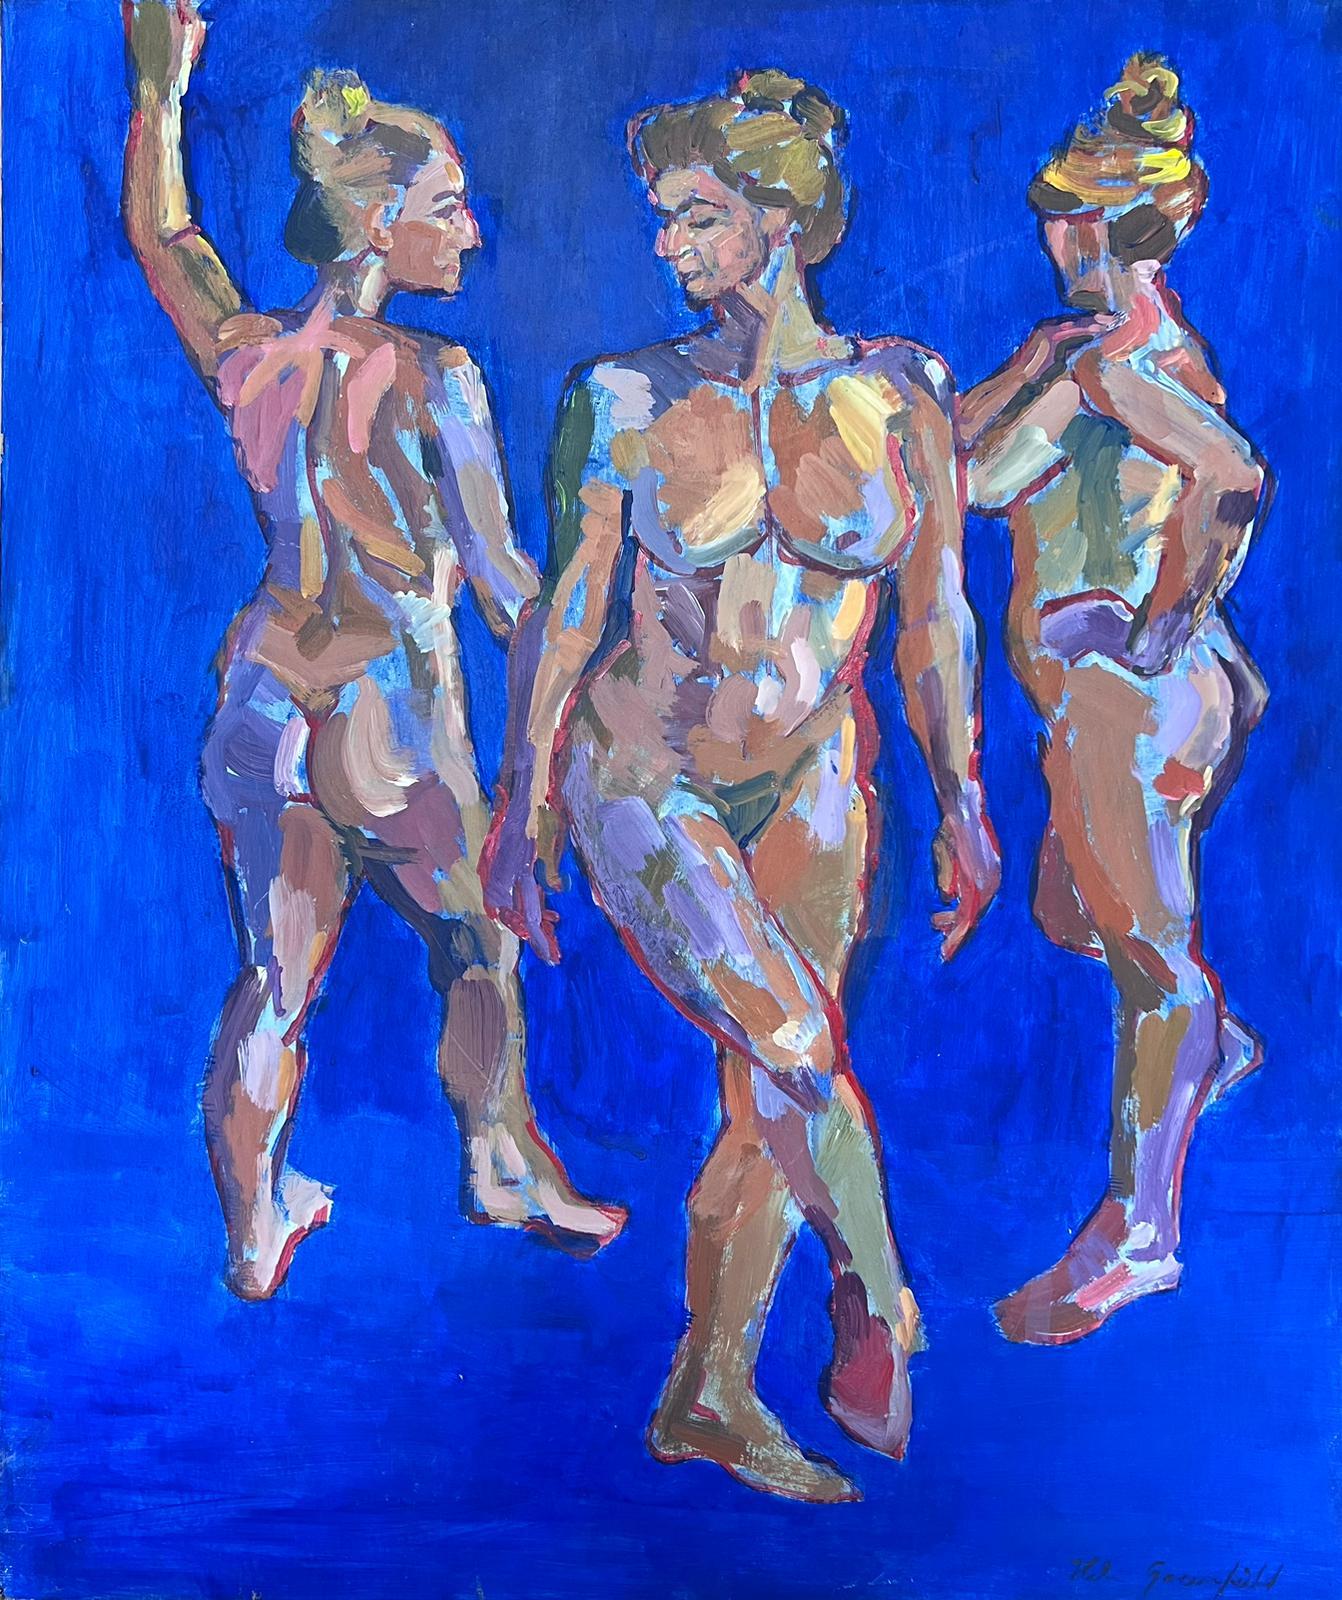 Three Nudes
by Helen Greenfield (British 20th century)
signed oil painting on board, unframed
board: 30 x 25 inches
condition: overall very good
provenance: all the paintings we have by this artist have come from their studio sale in England

Helen